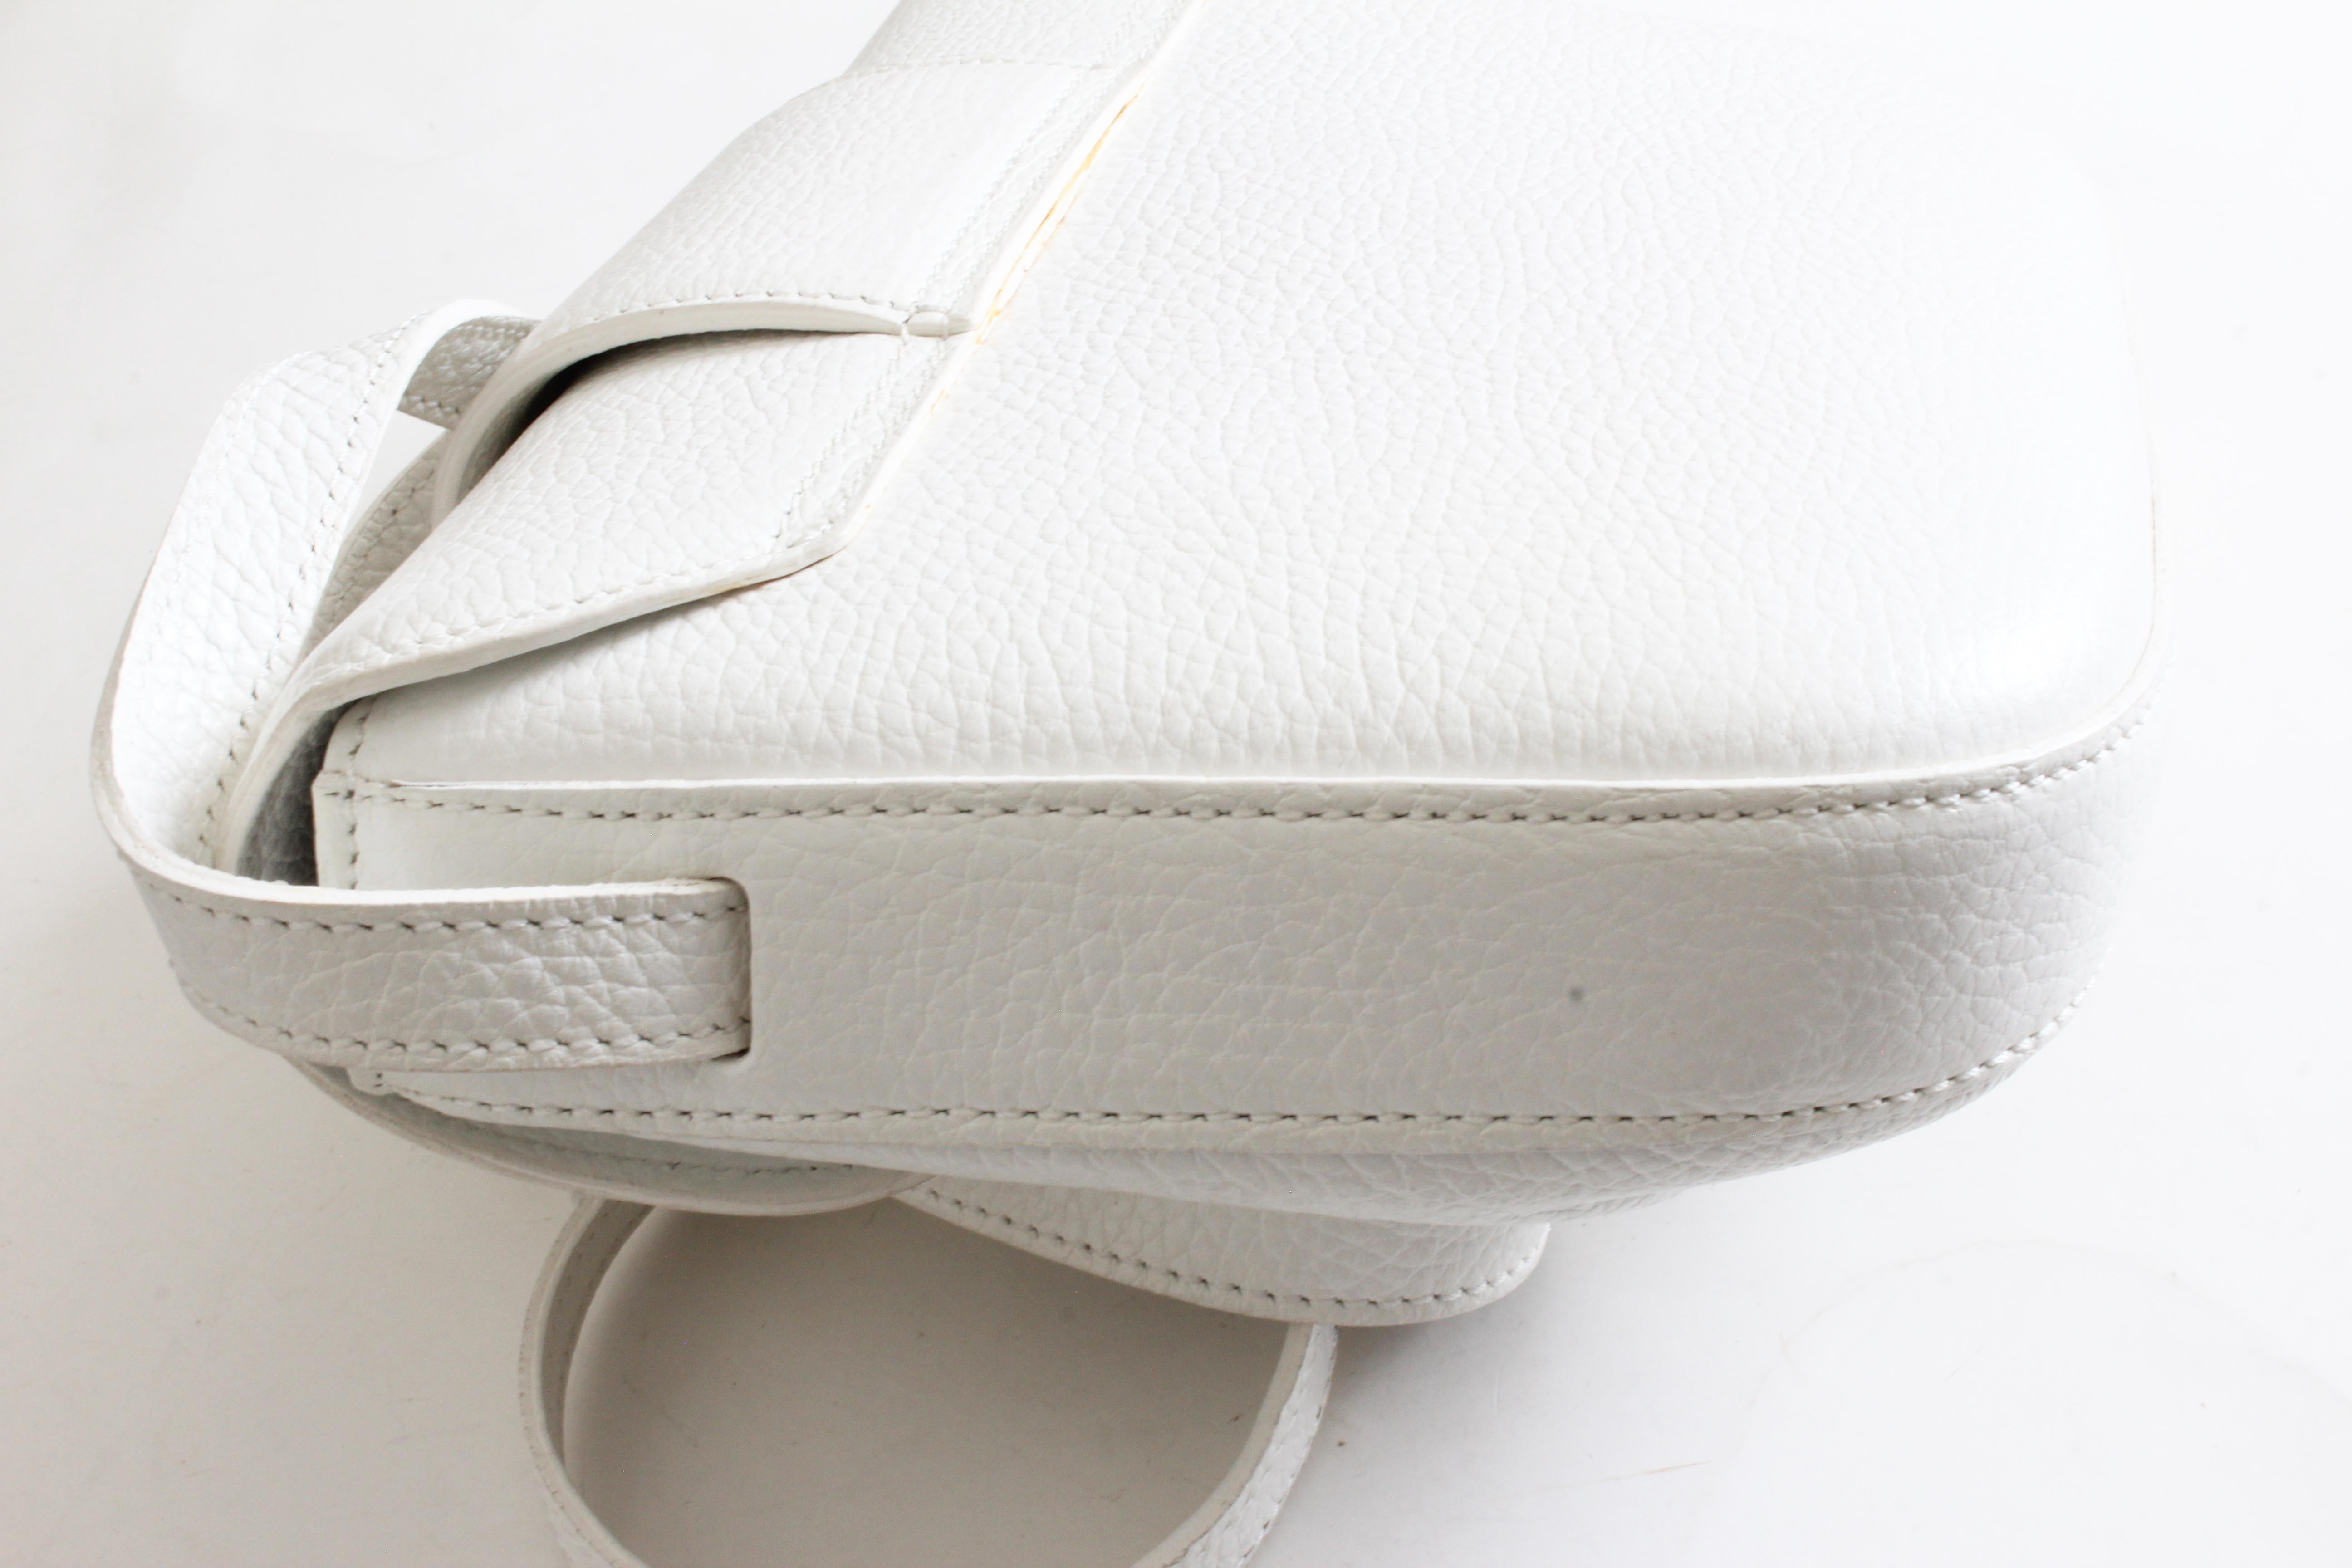 Bally Crossbody Bag White Pebbled Leather Top Flap Shoulder Bag Italy 3